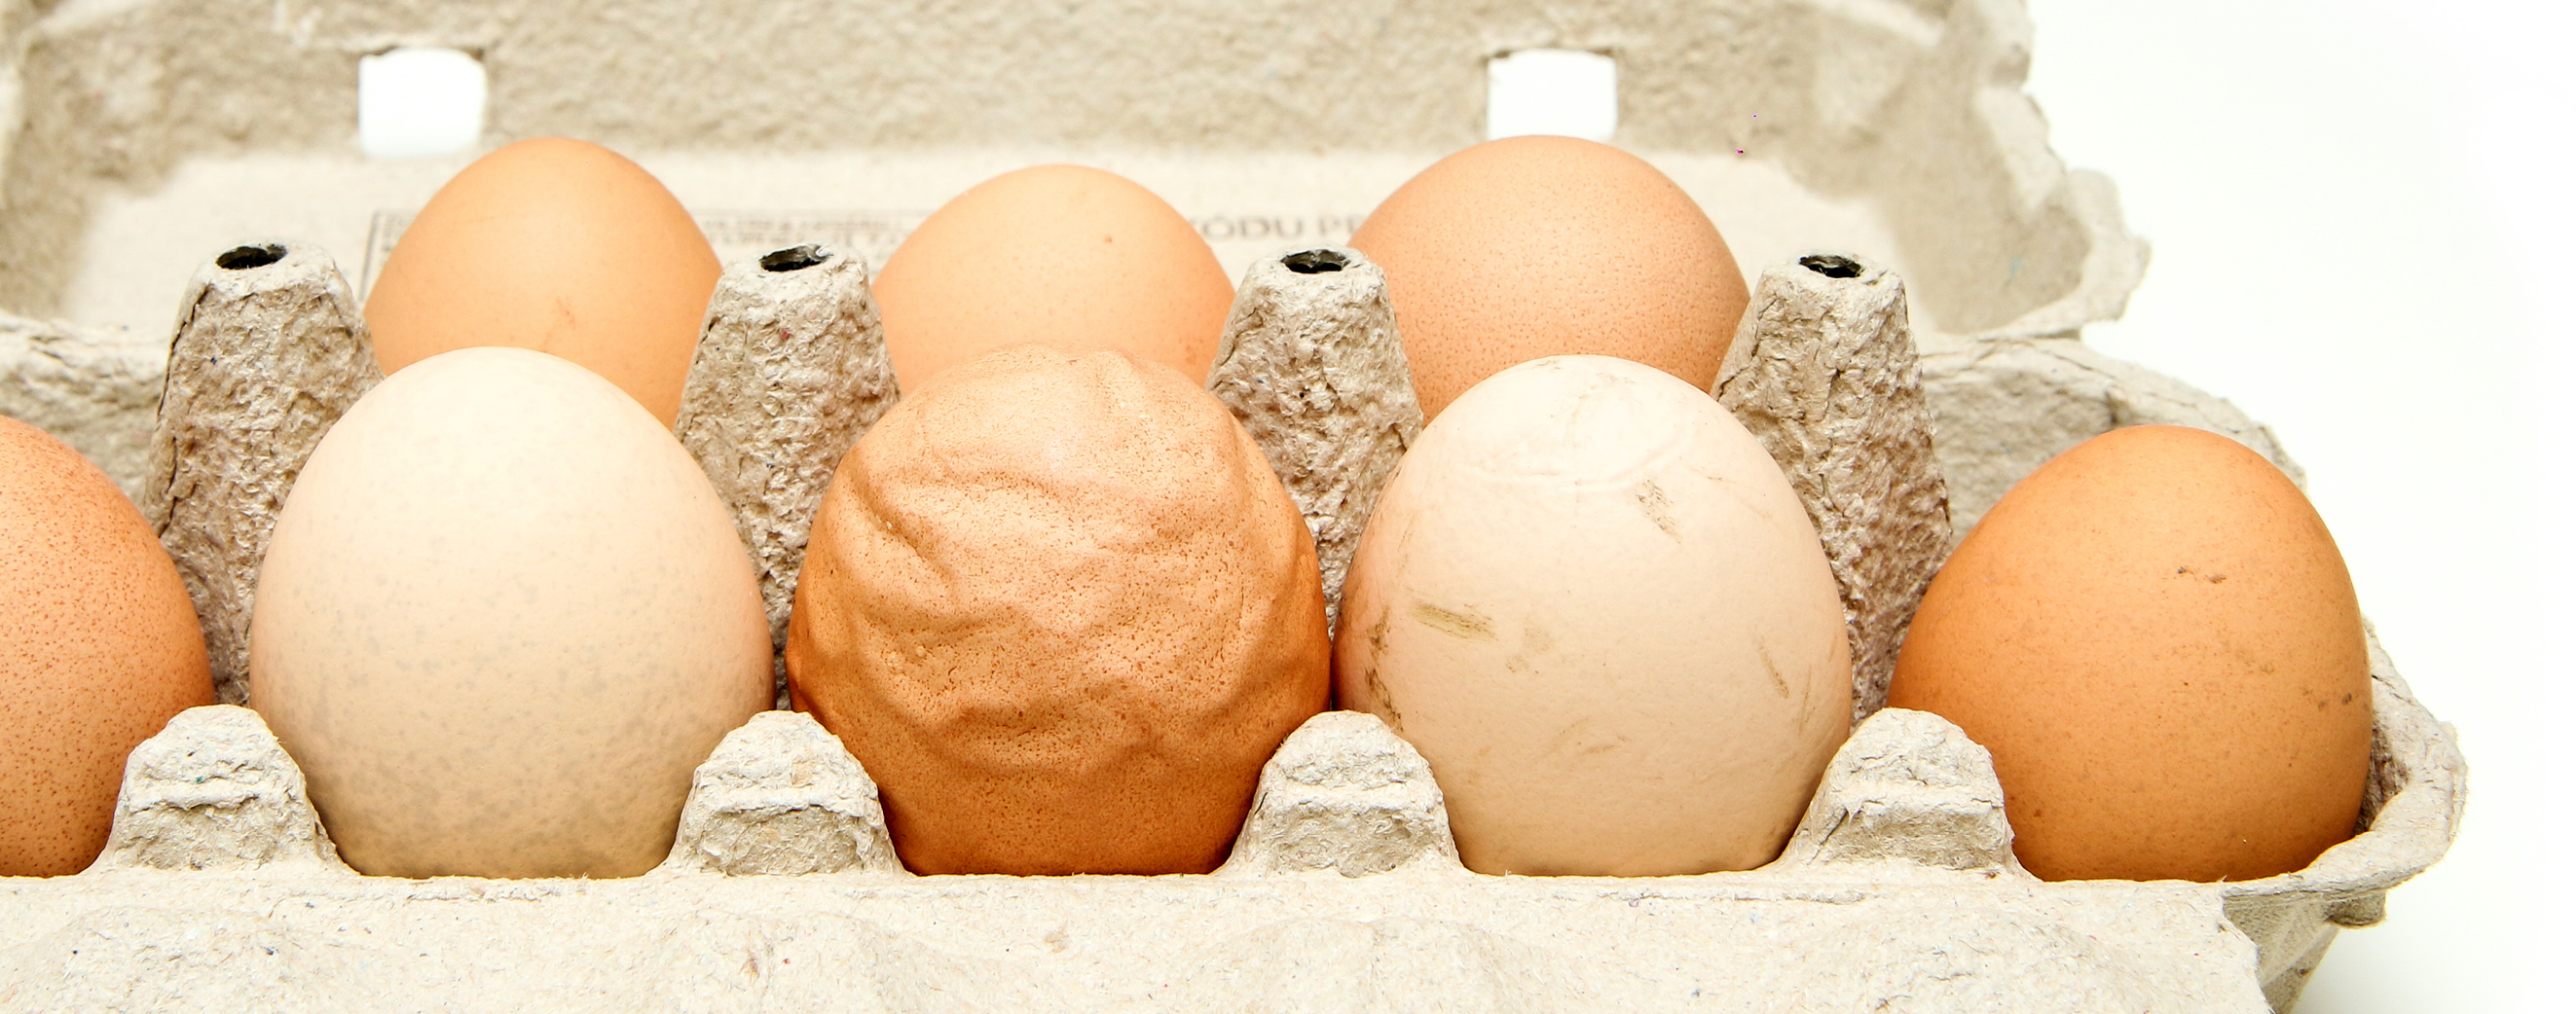 A Dozen Egg Abnormalities: How They Affect Egg Quality